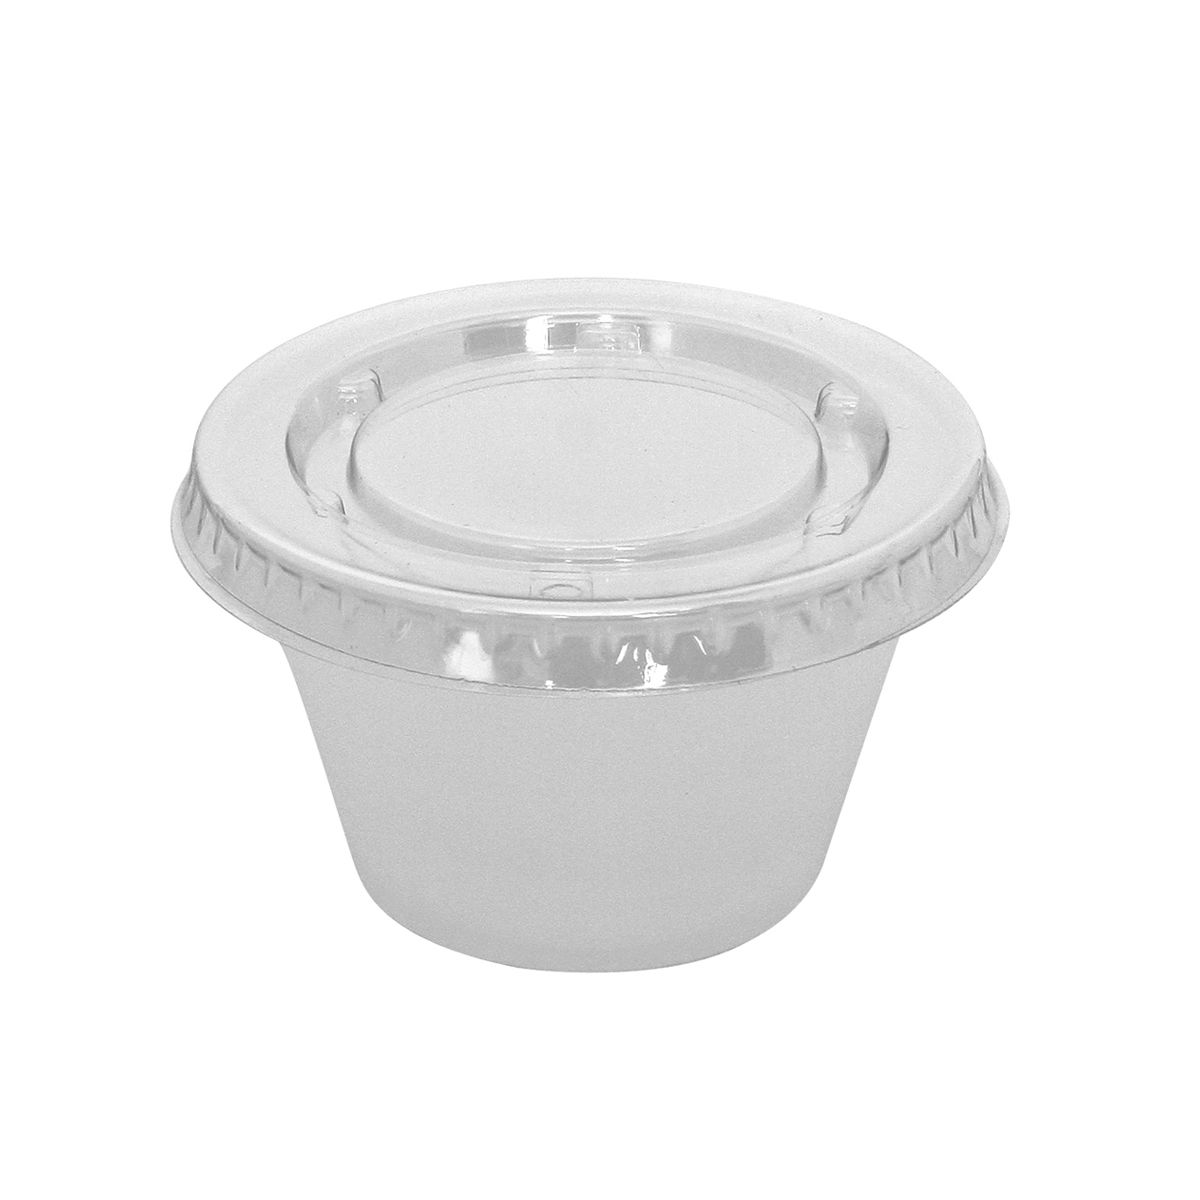 Portion Cups Insect Culture containers. Plastic (4 oz) with Lids